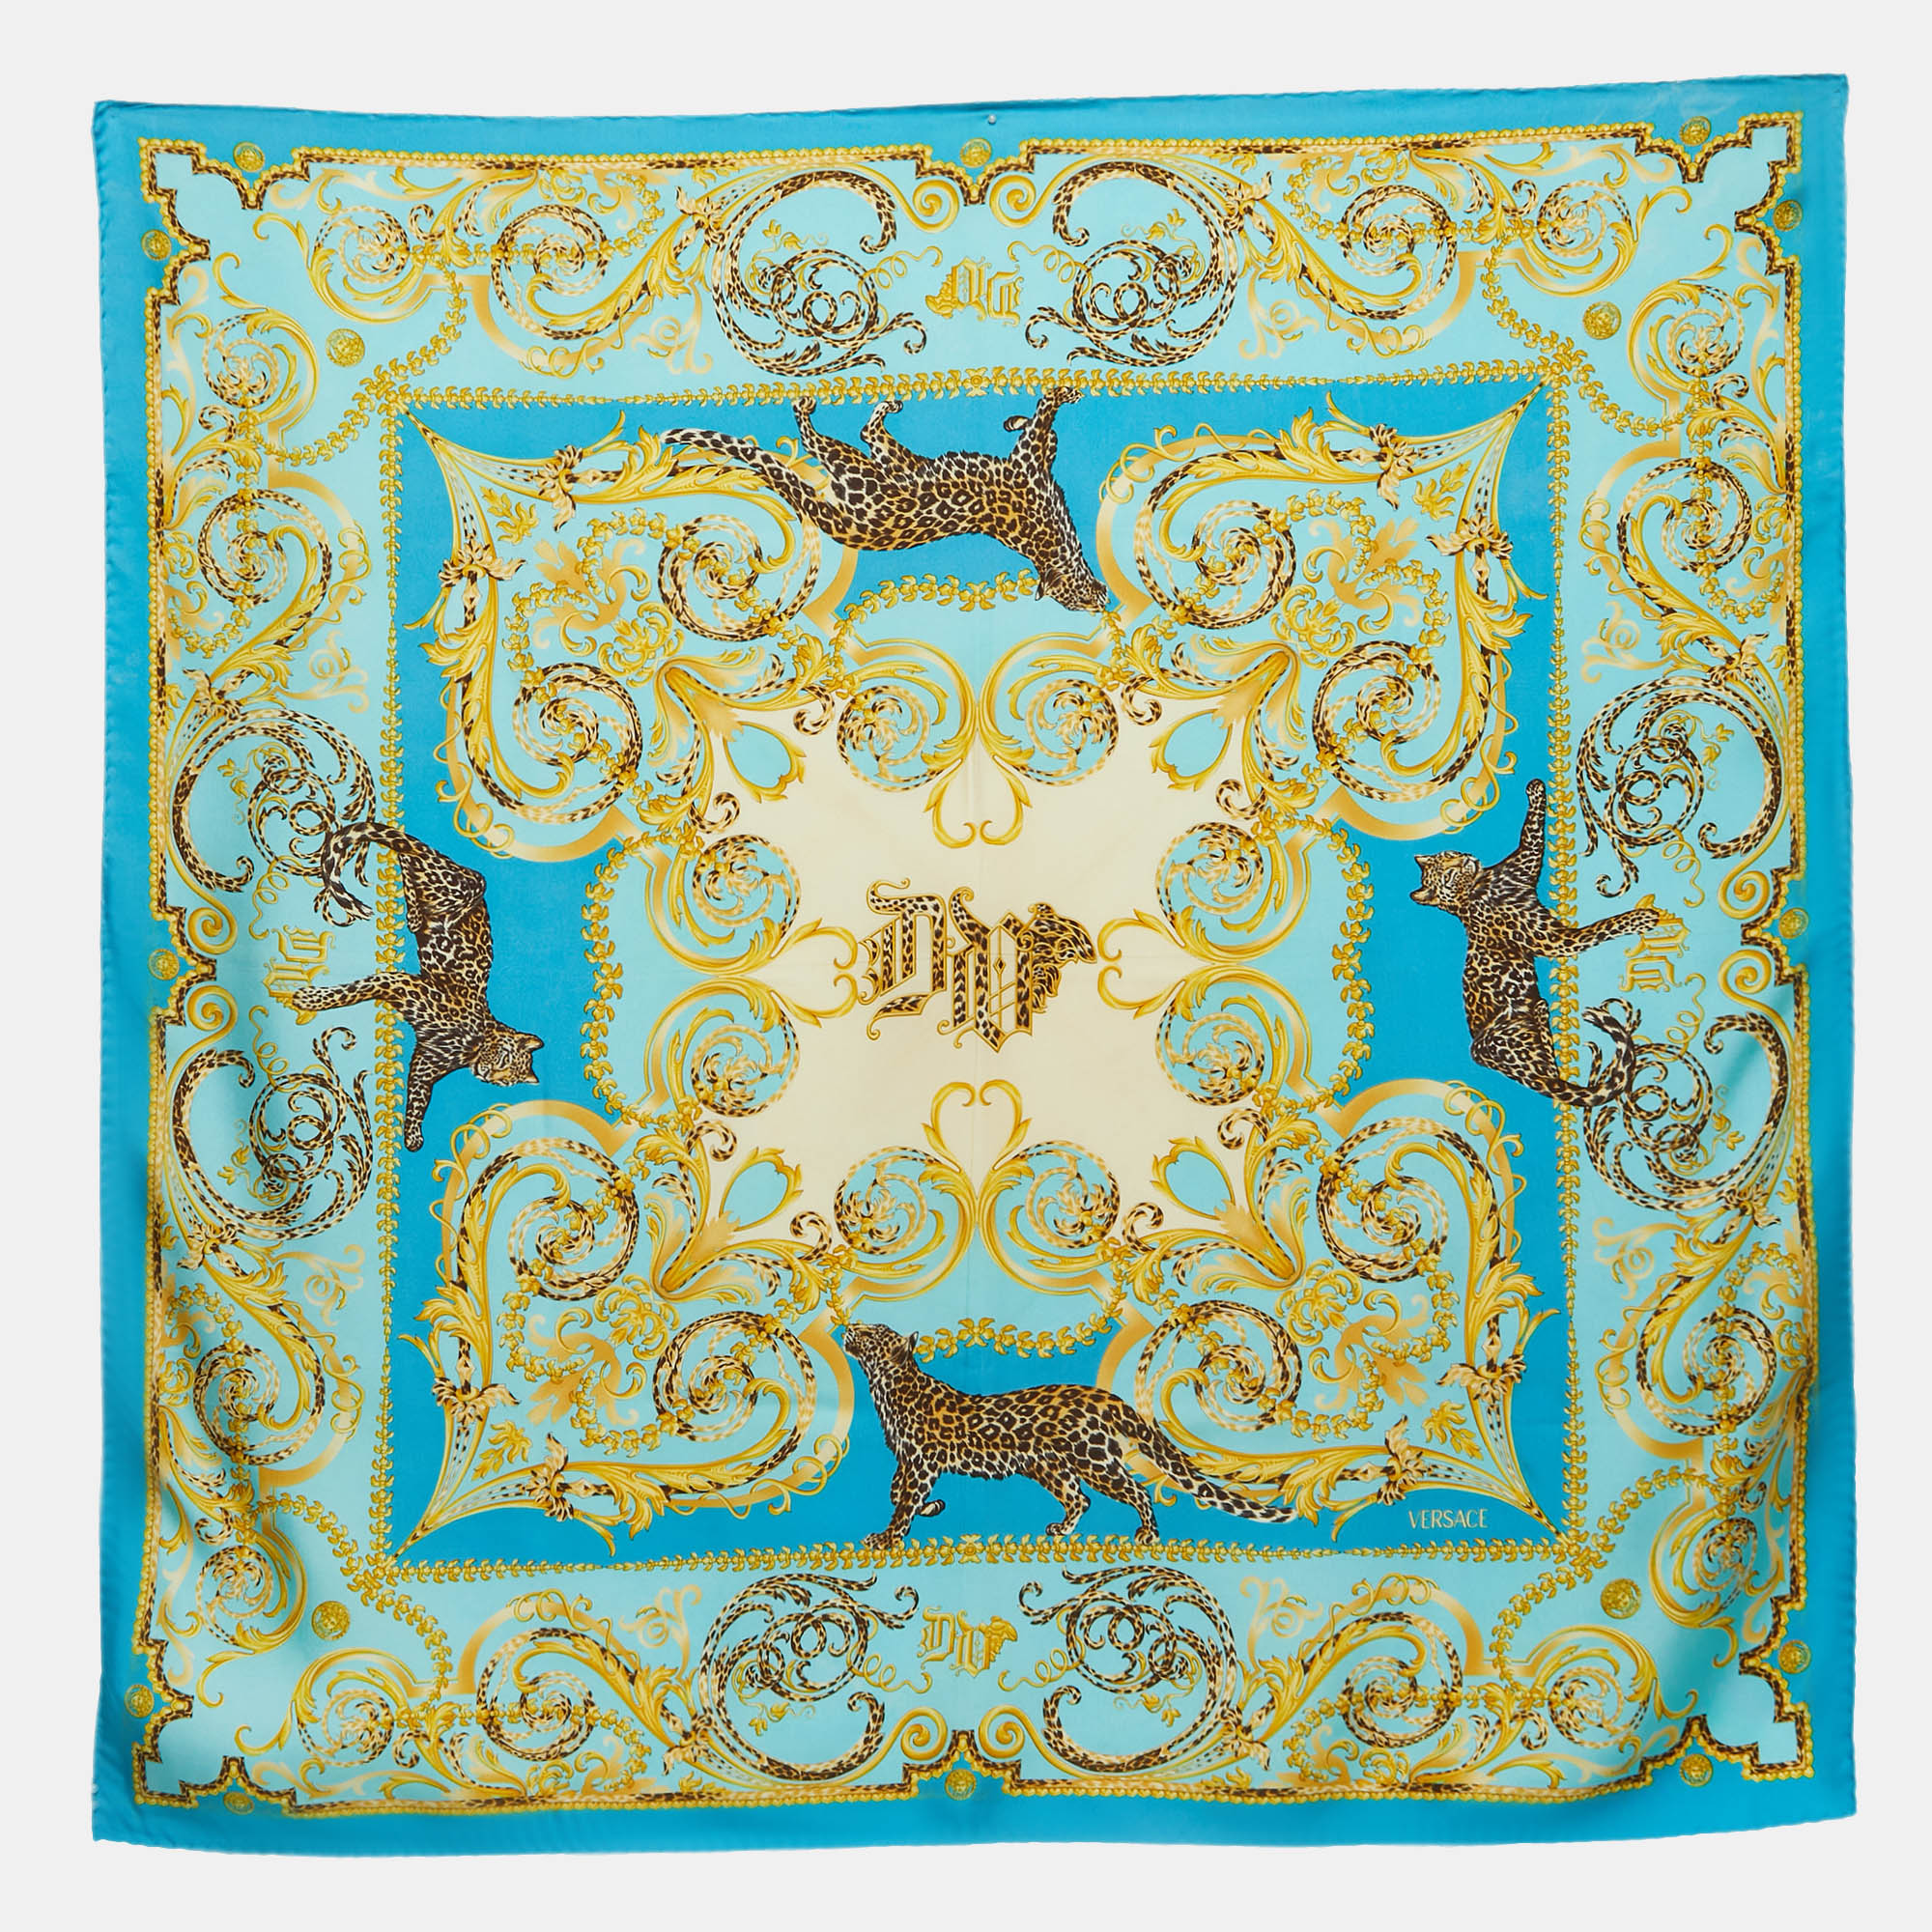 Gianni Versace Blue Baroque Leopard Printed Silk Square Scarf